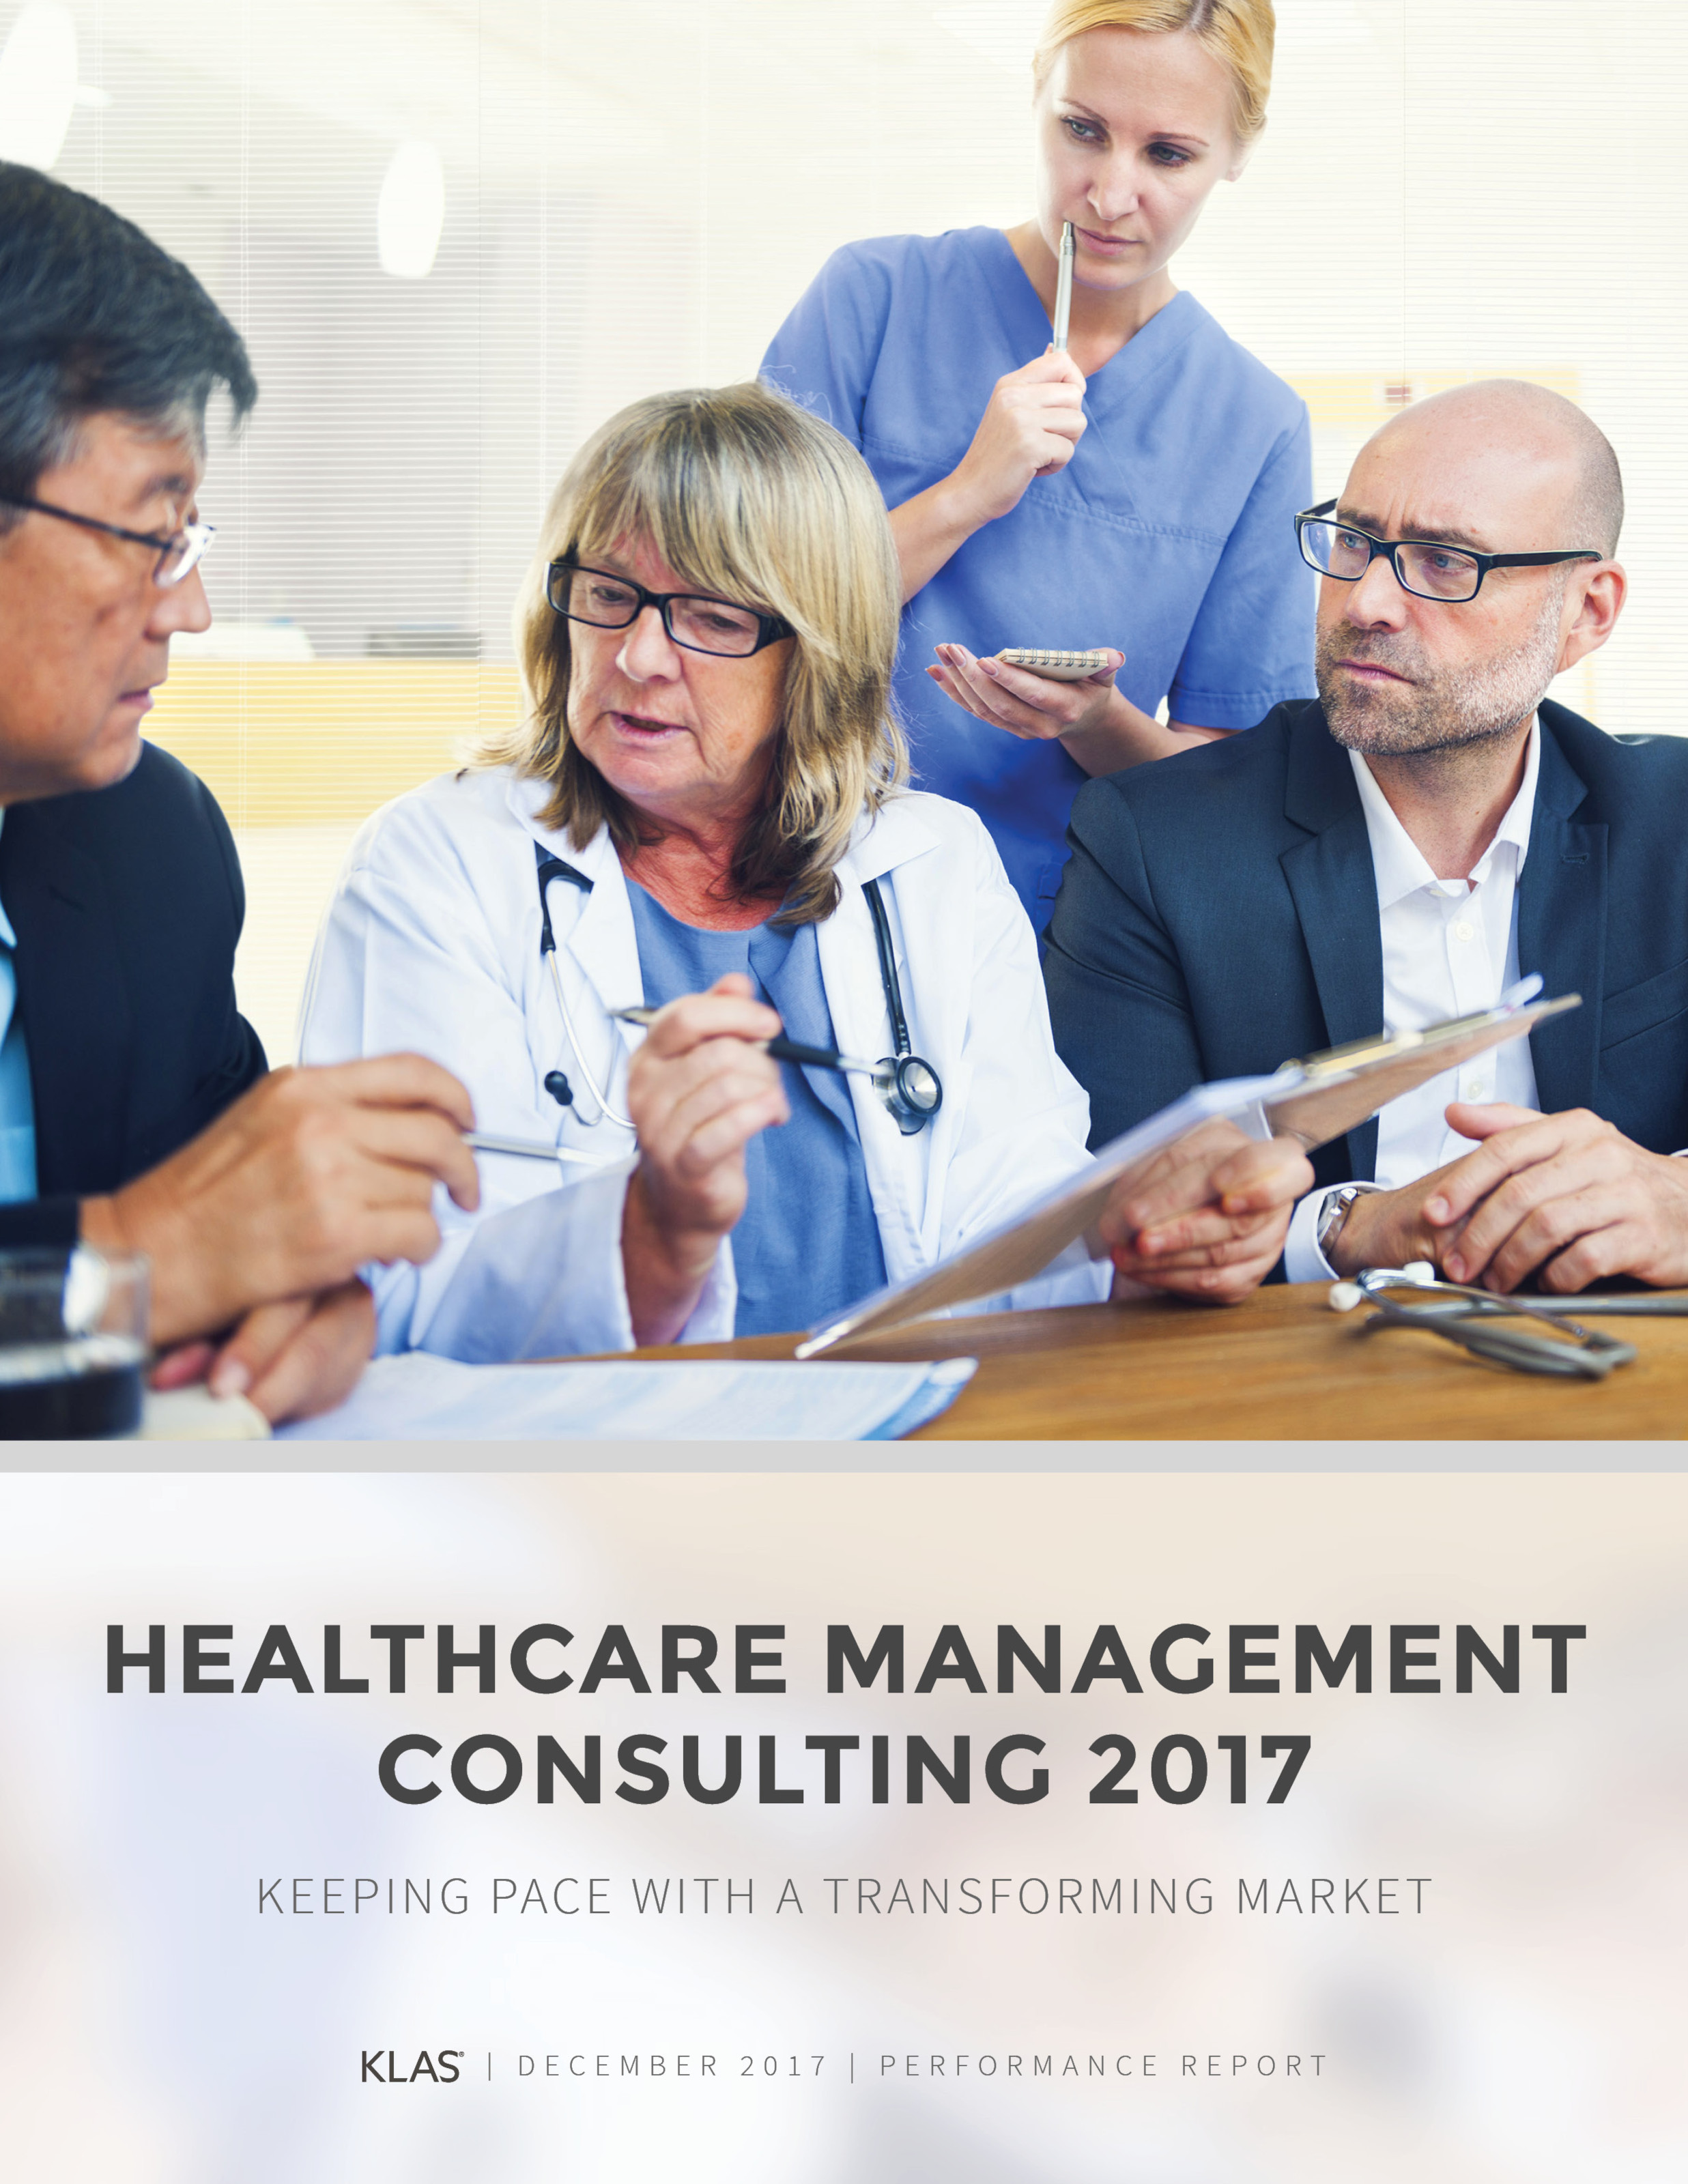 Leadership & Management For The Health Care Industry